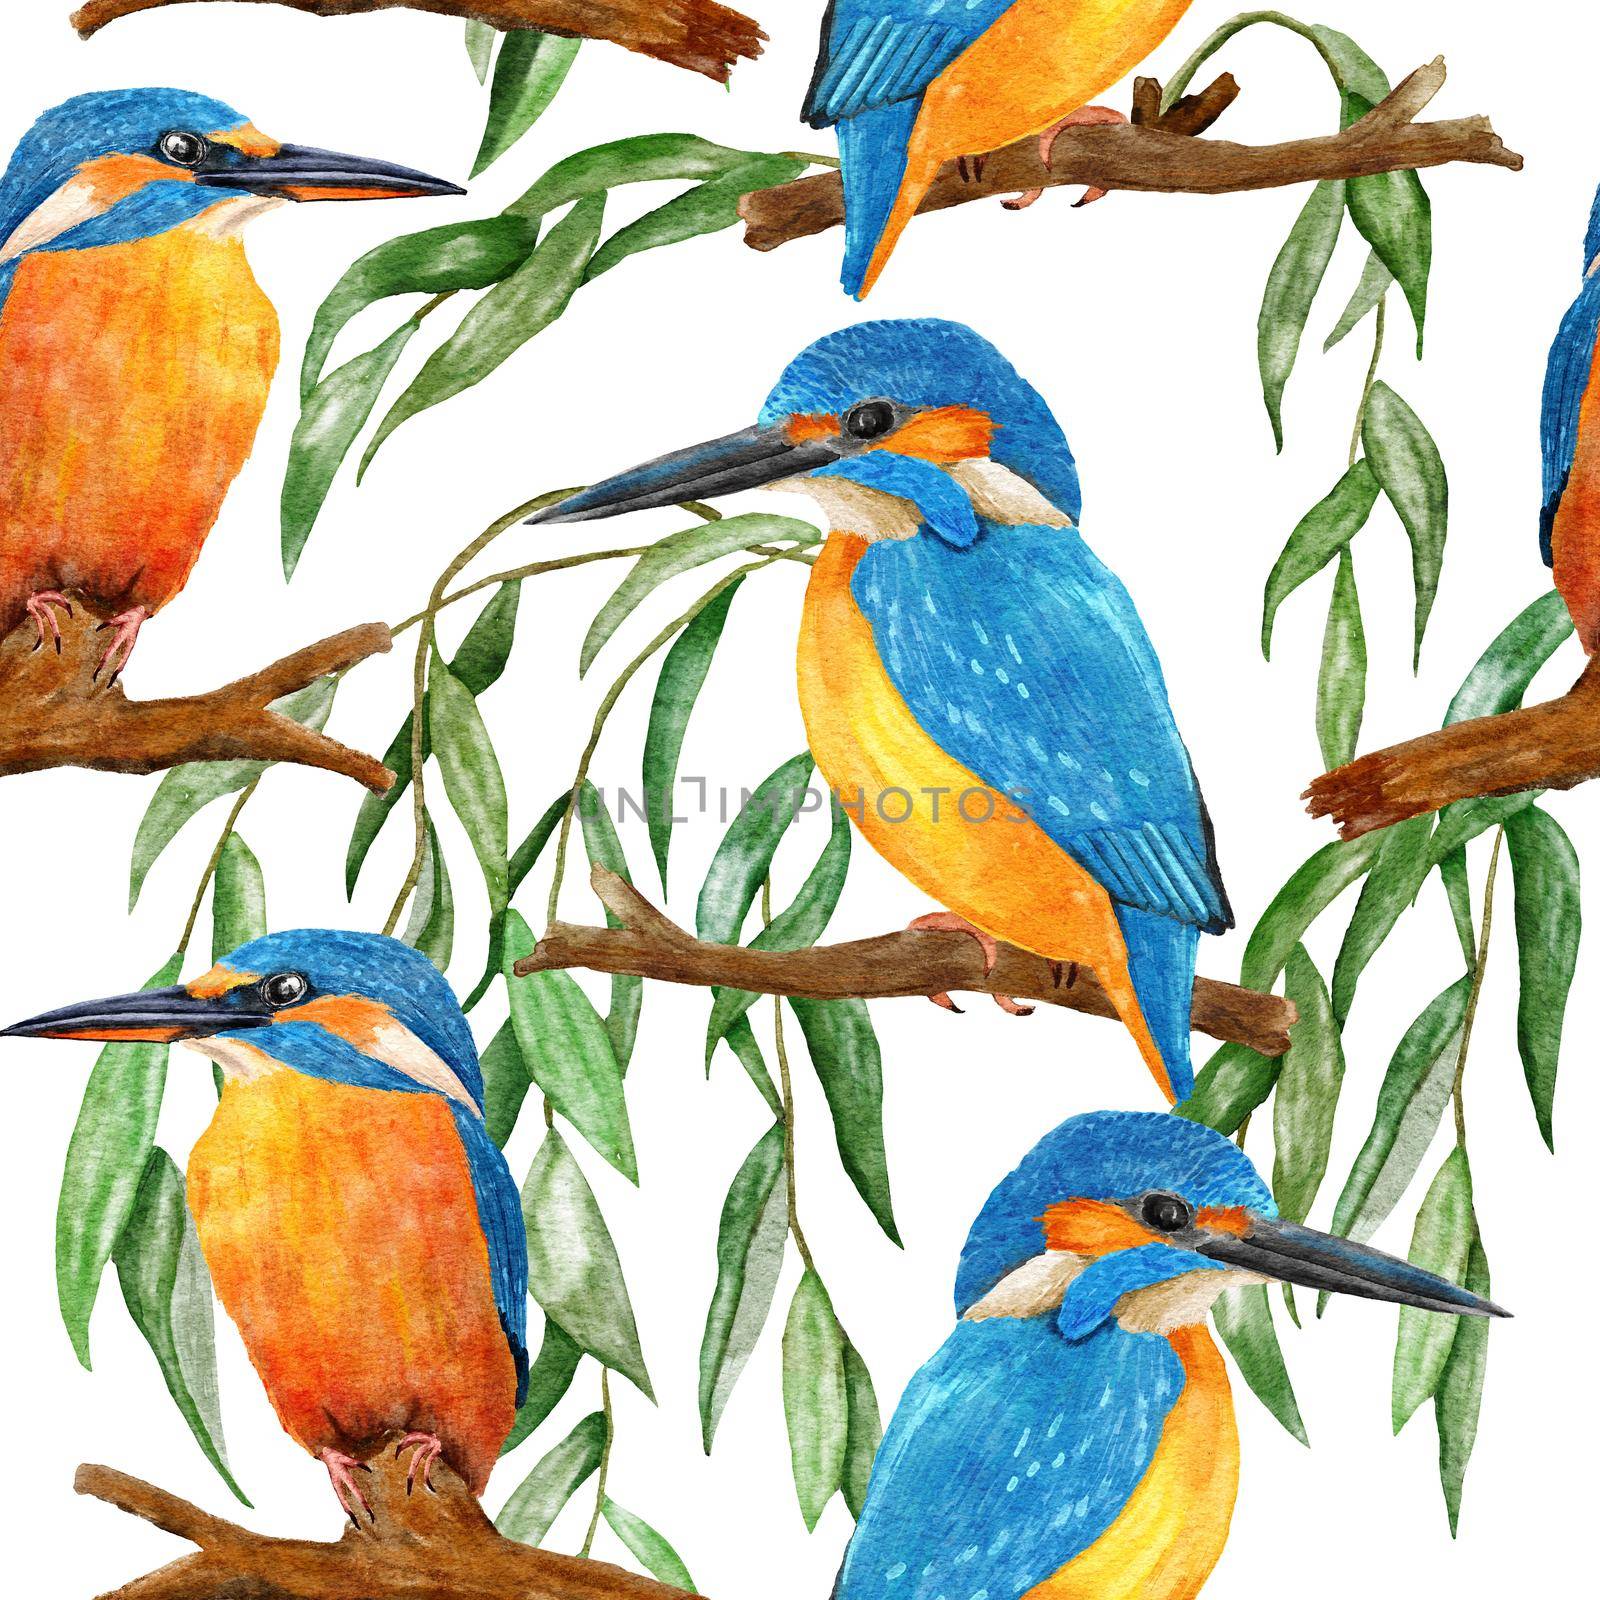 Watercolor seamless hand drawn pattern with wild kingfisher bee-eater birds in forest woodland. Wildlife natural vintage background with floral leaves greenery branches, nature bird flying design